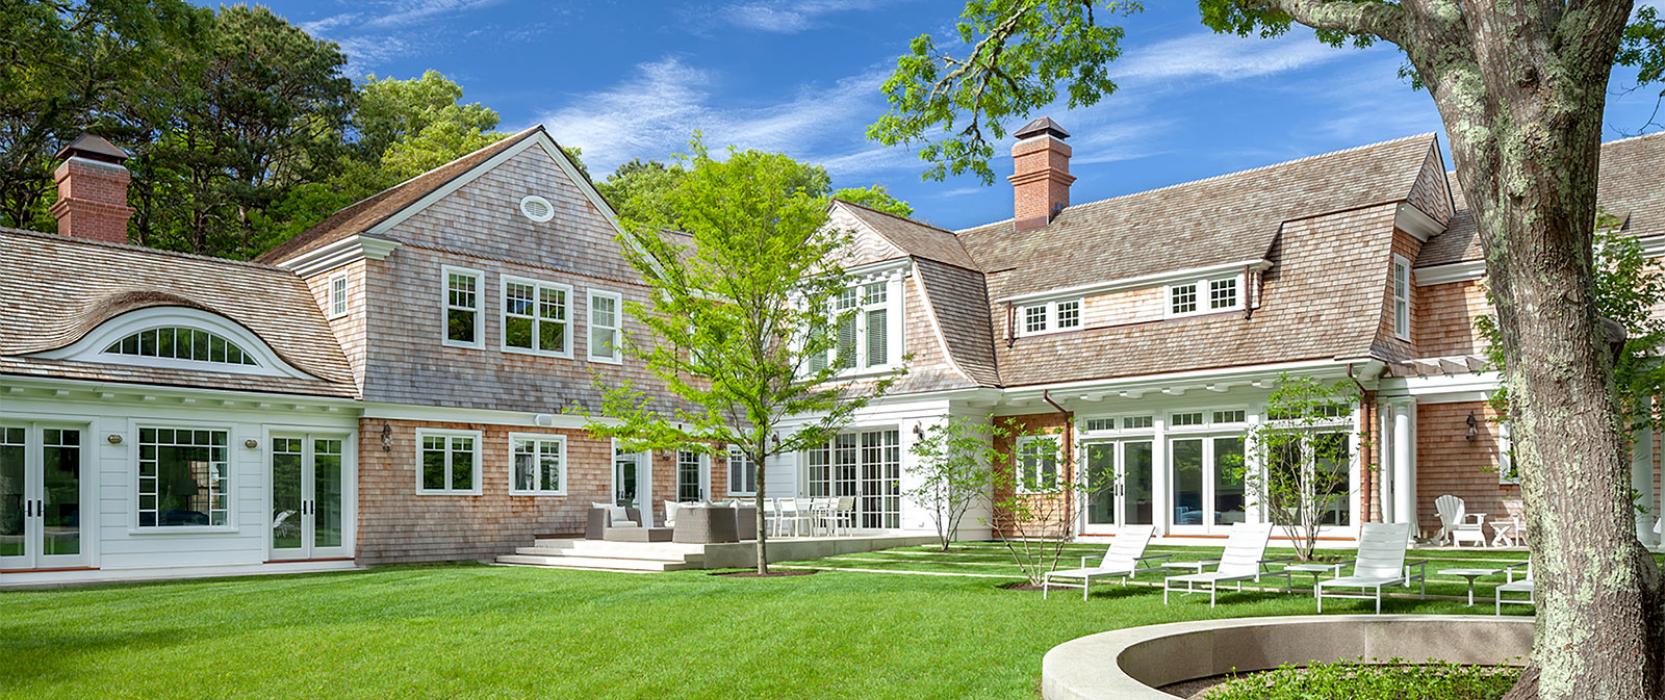 Gambrel Shingle Style Cape home designed by Catalano Architects and constructed by Travis Cundiff Associates, Inc.